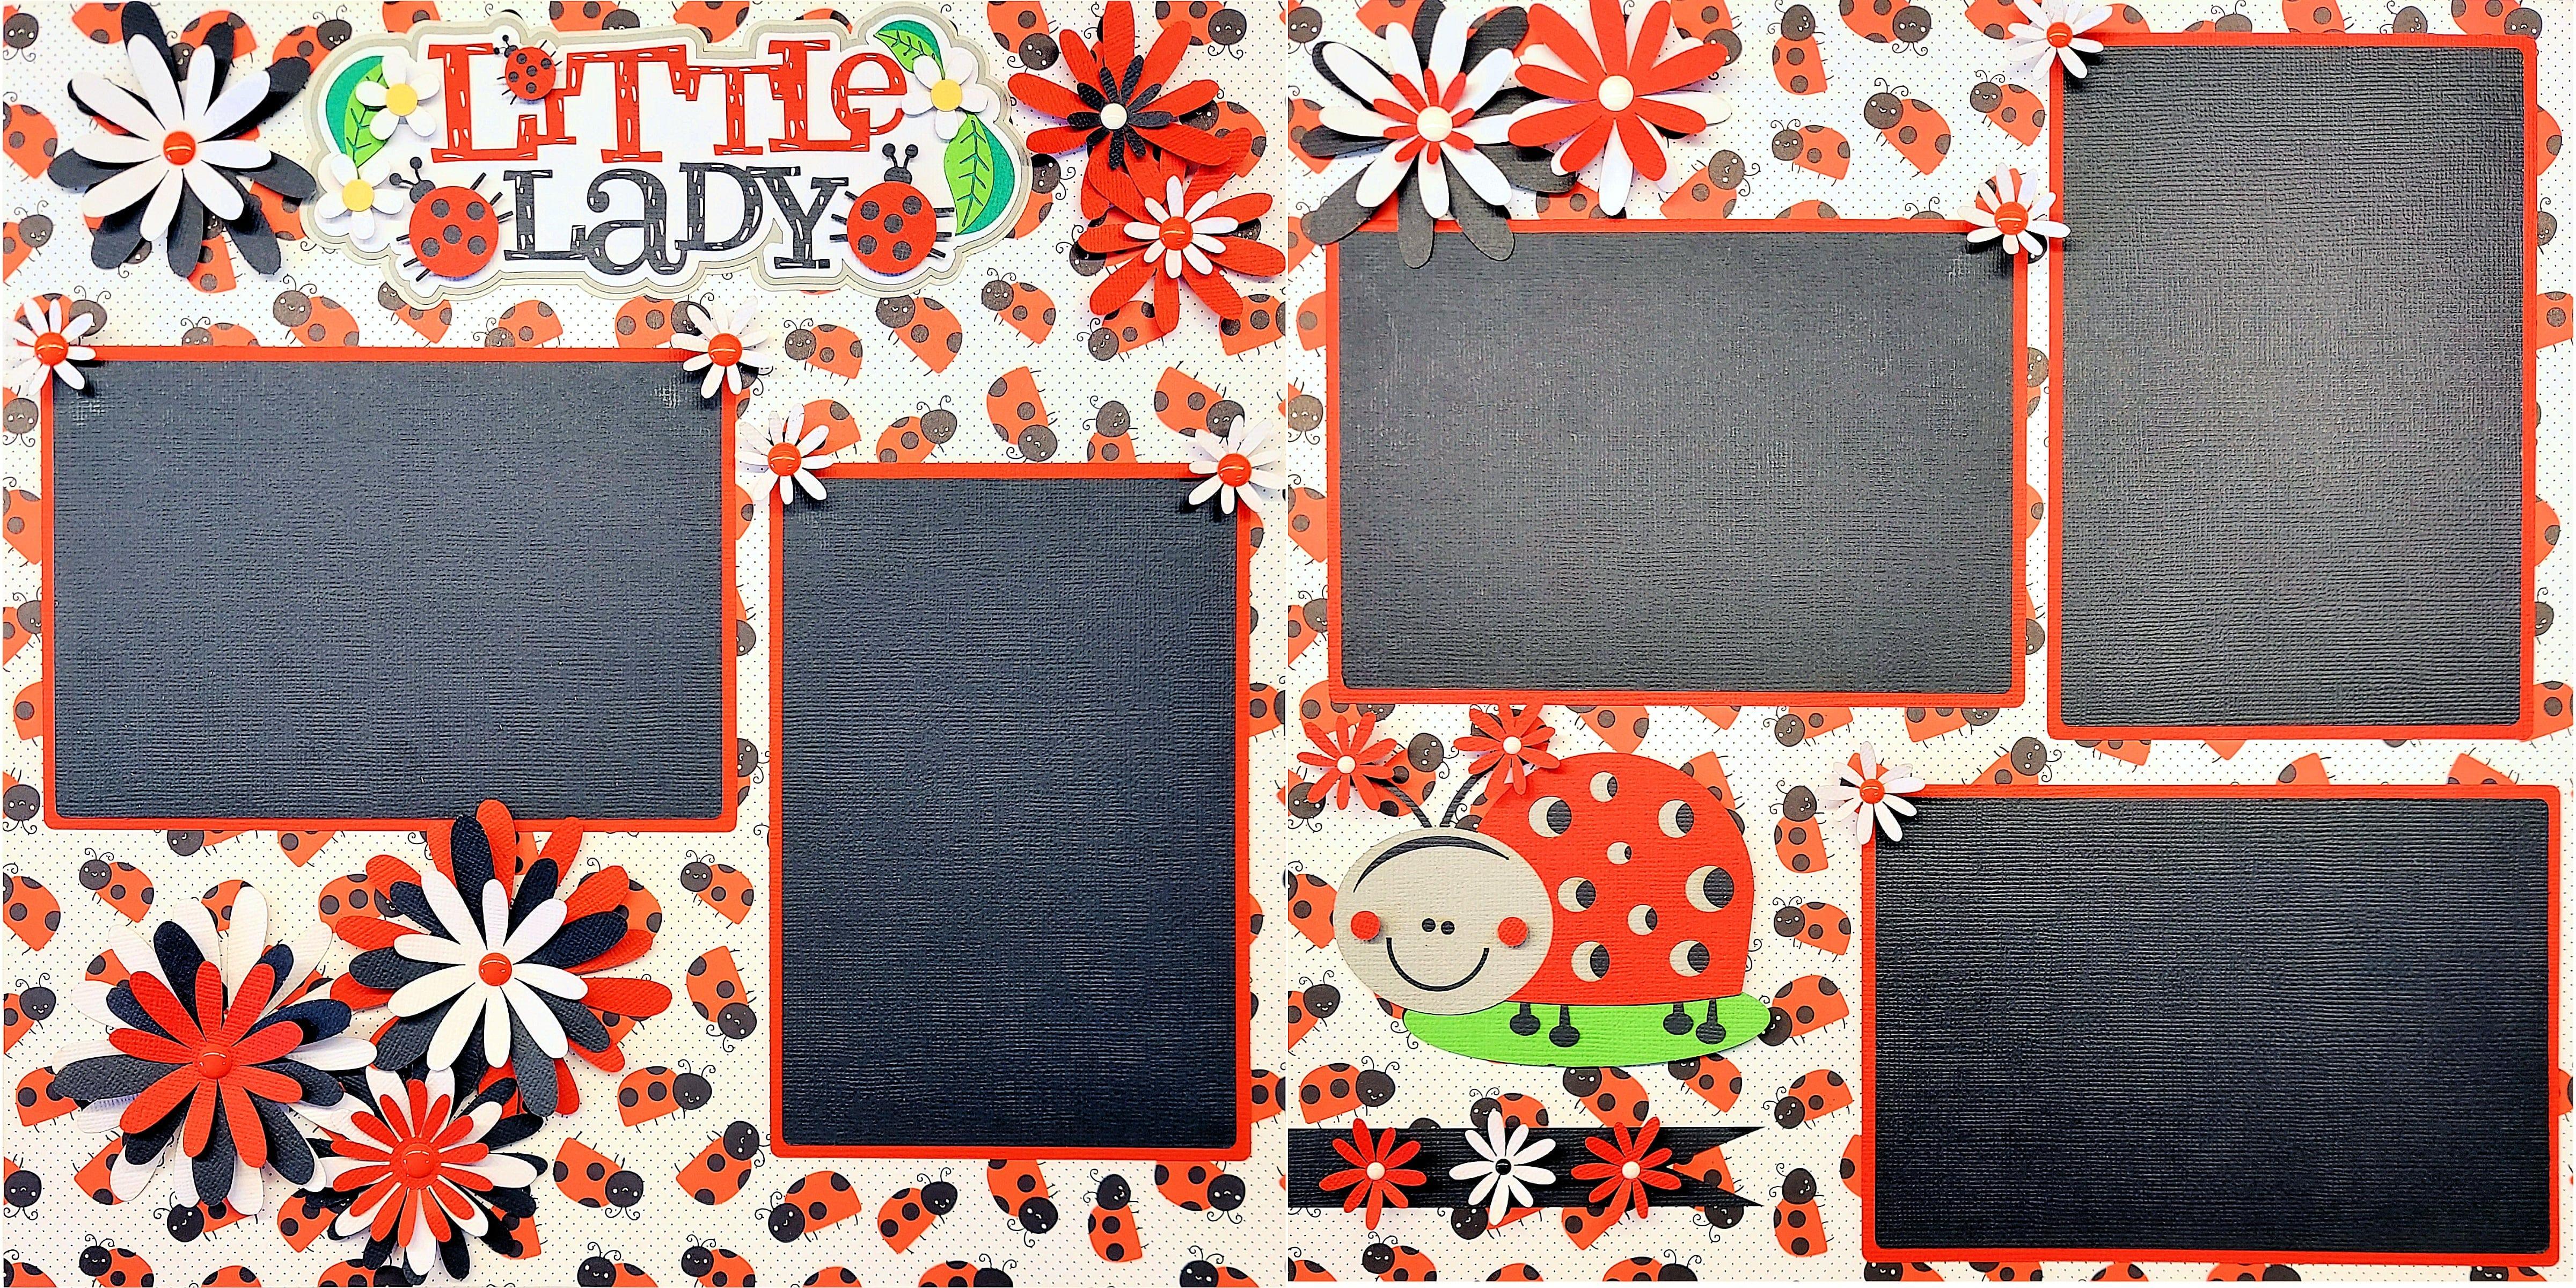 Little Lady Bug  (2) - 12 x 12 Pages, Fully-Assembled & Hand-Crafted 3D Scrapbook Premade by SSC Designs